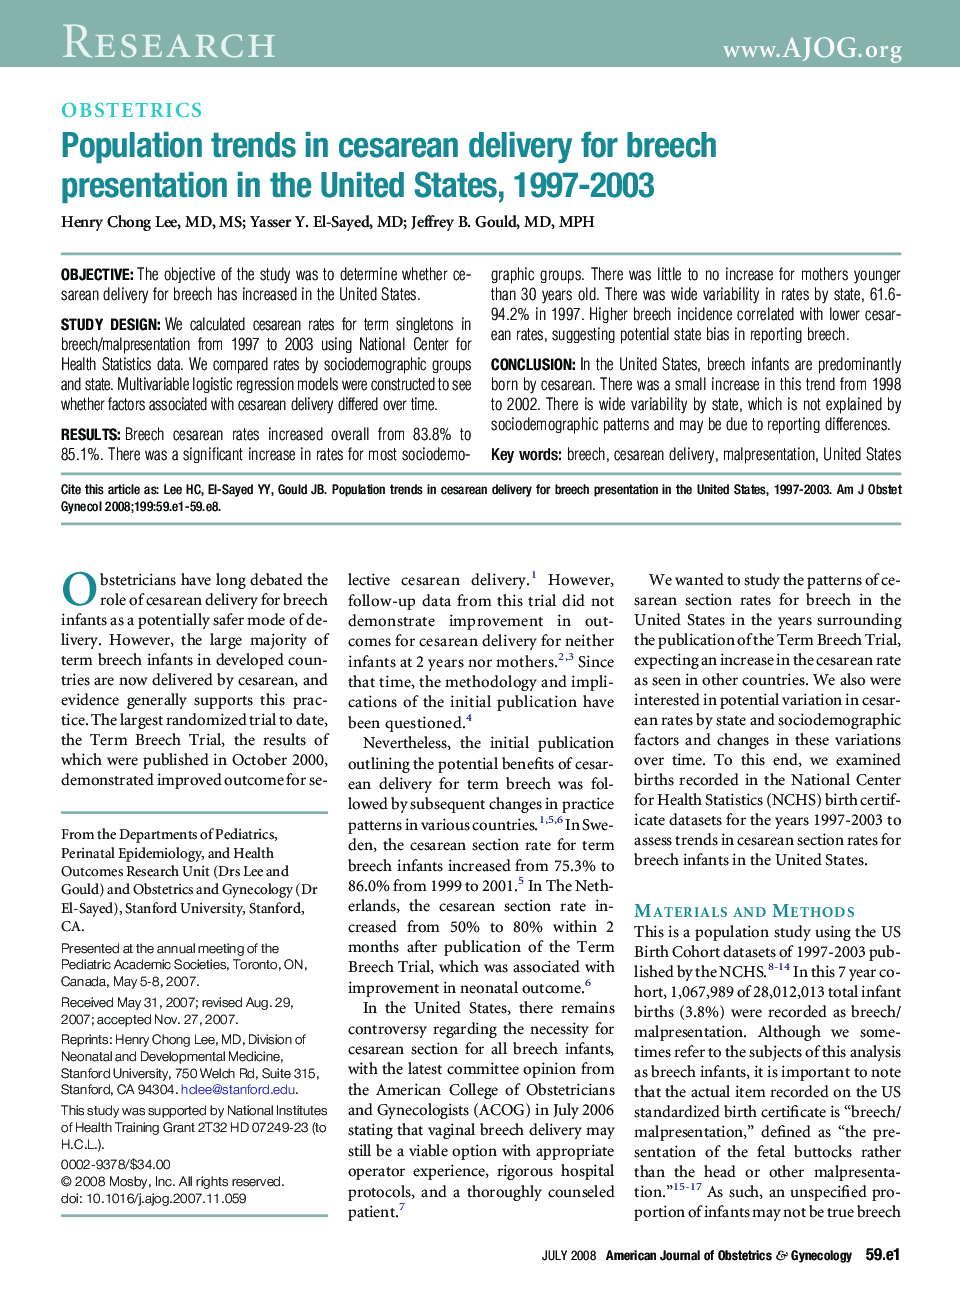 Population trends in cesarean delivery for breech presentation in the United States, 1997-2003